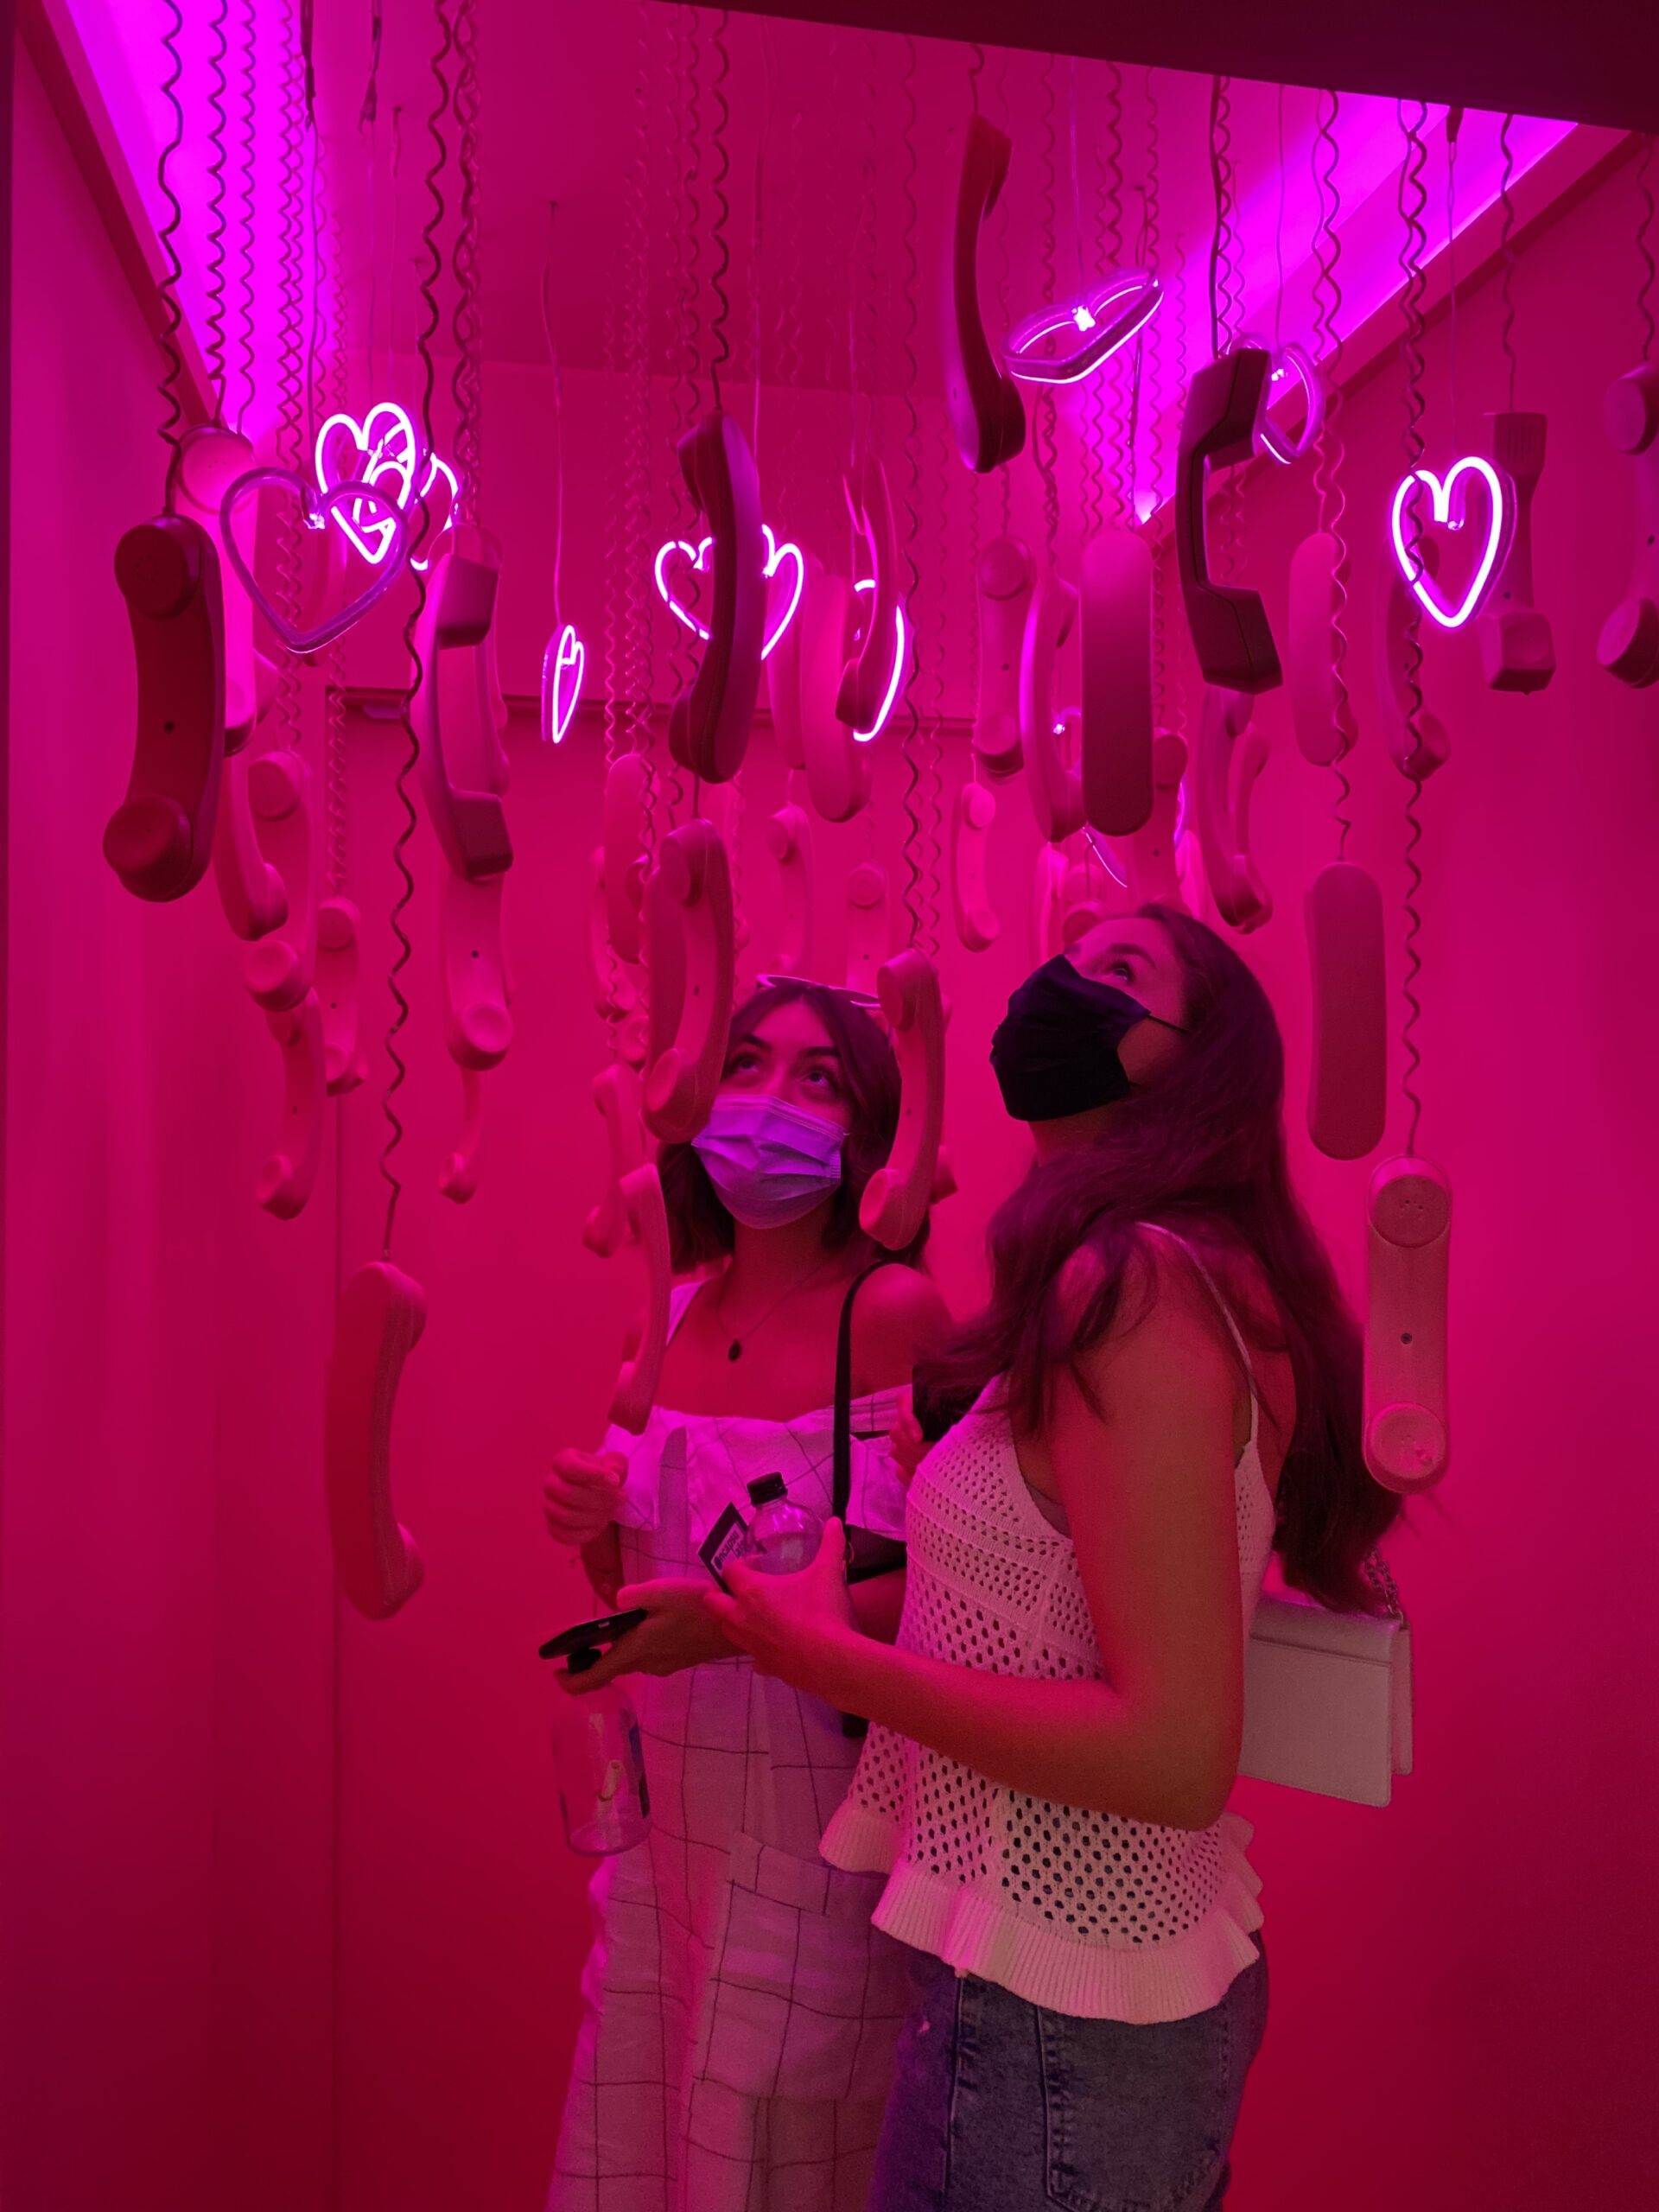 Amina and a few friends are in a bright pink room in an art gallery